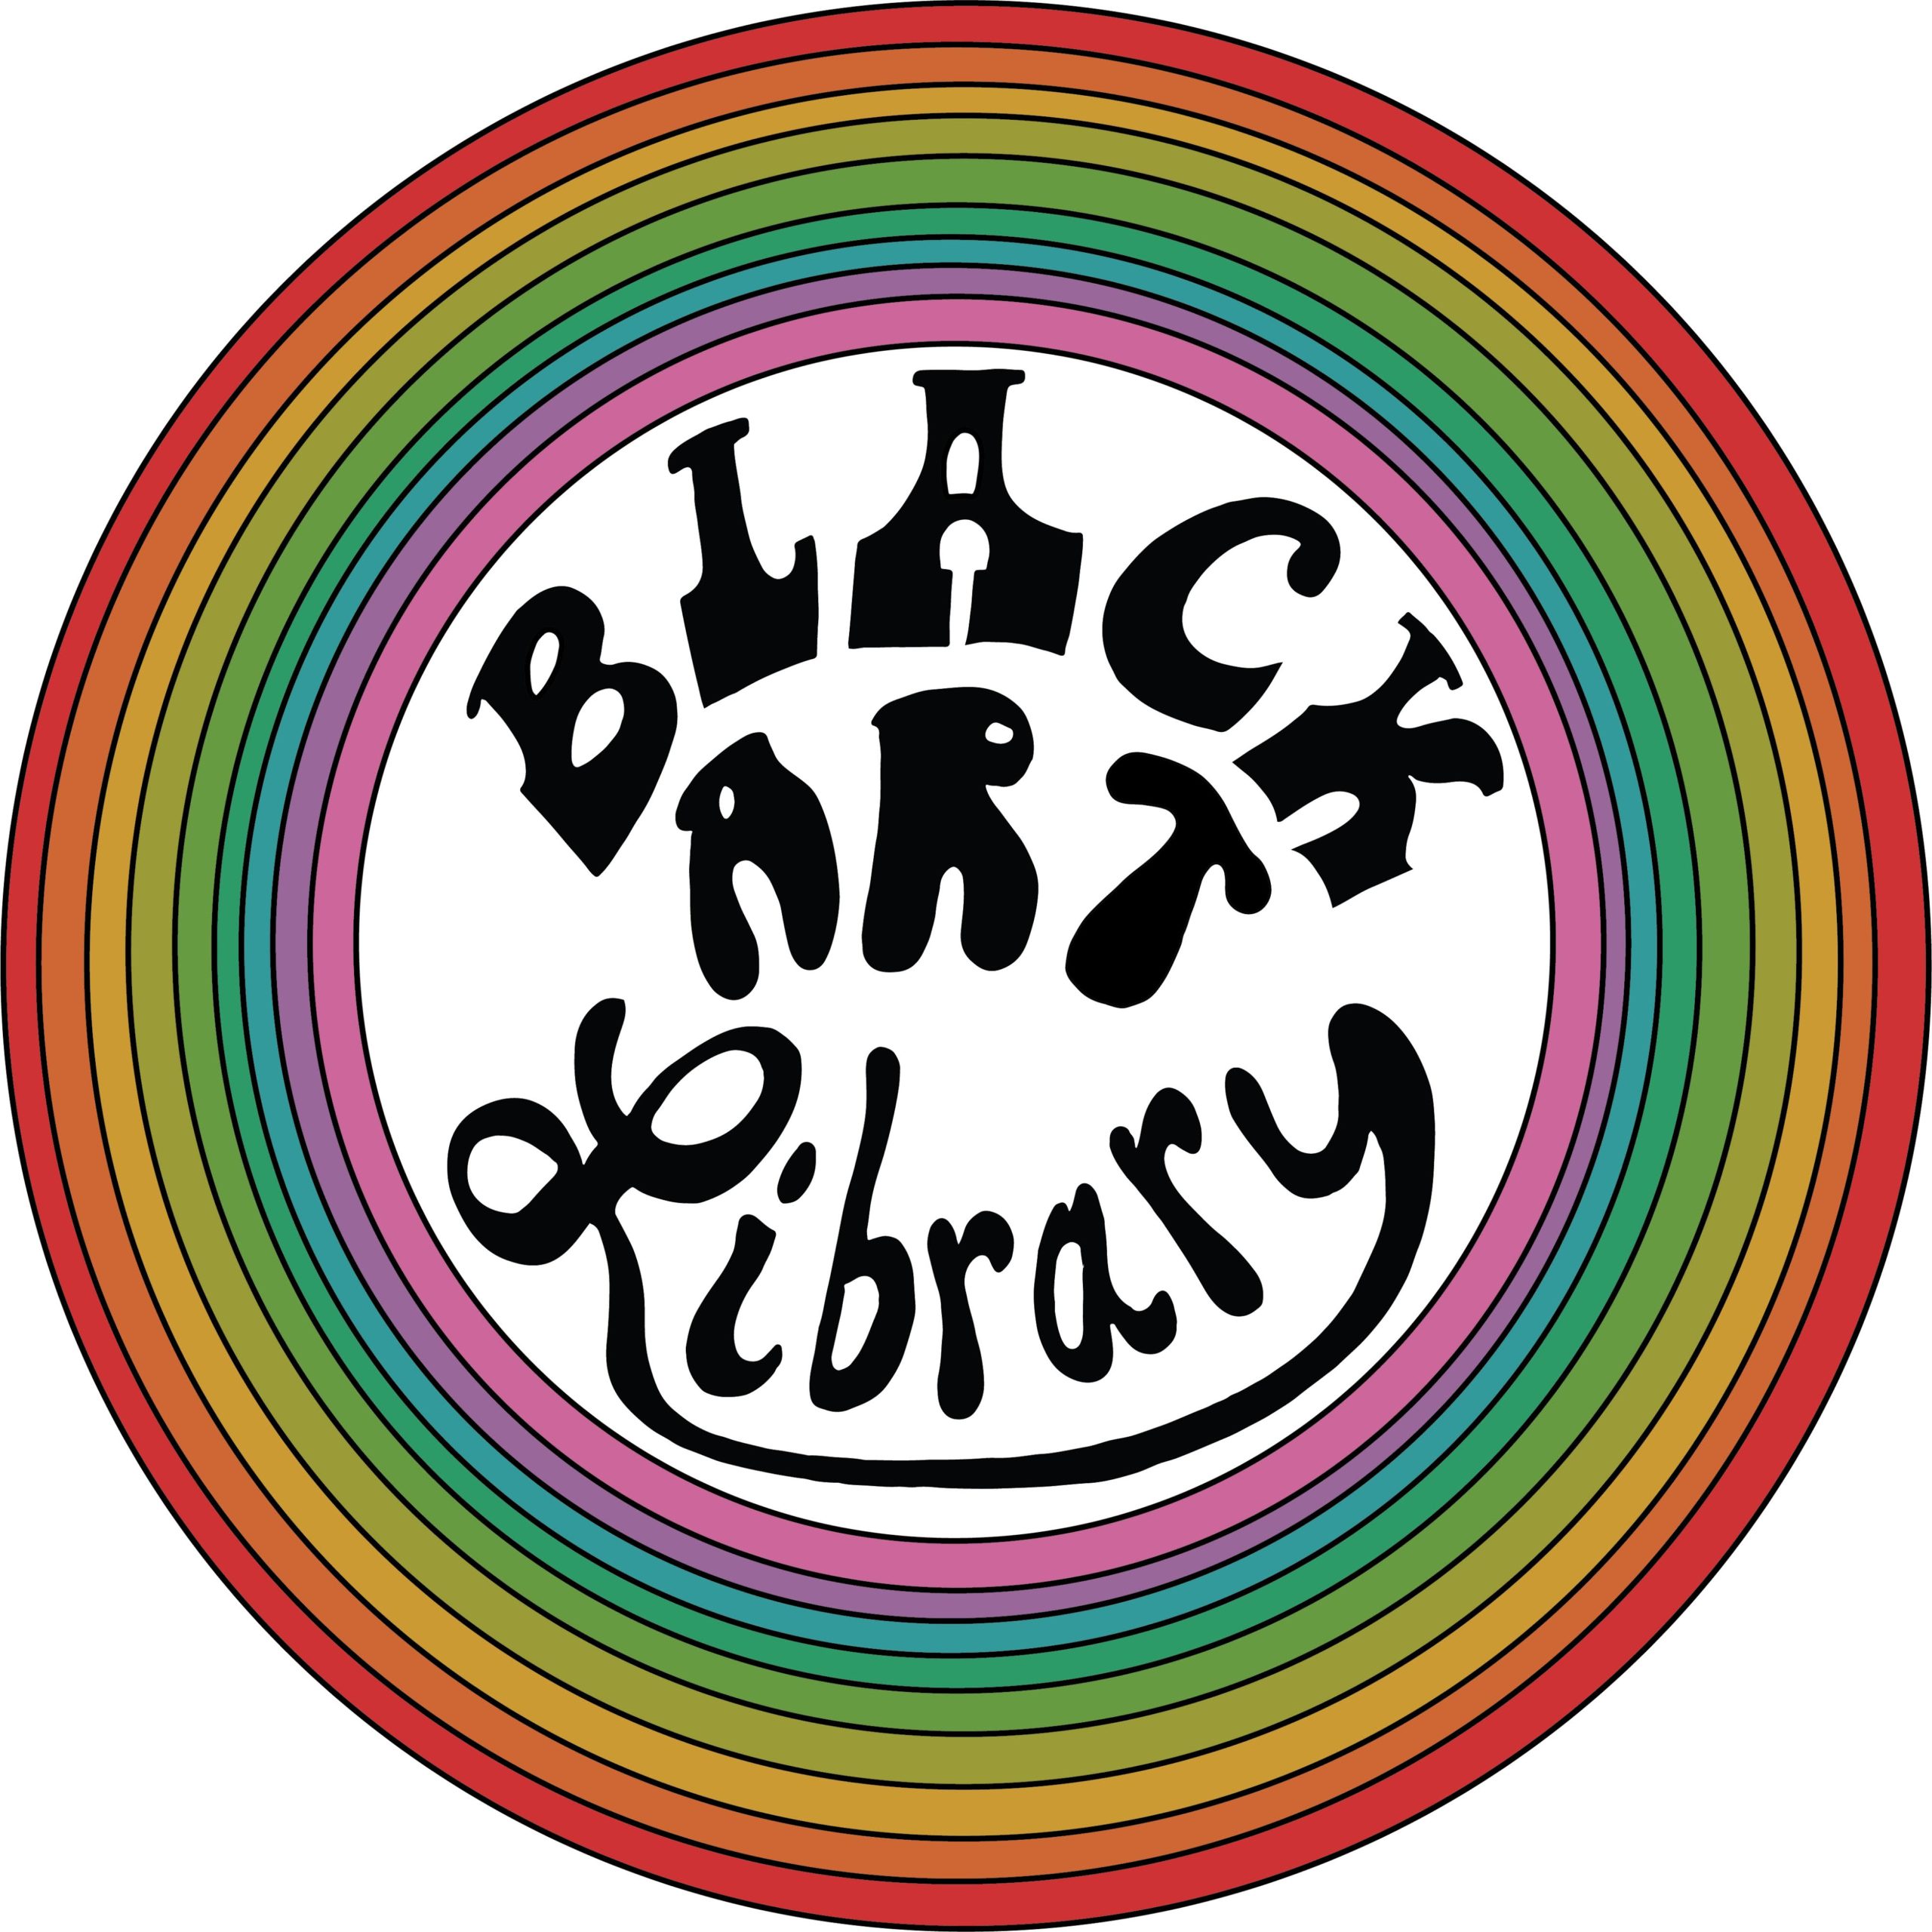 An illustration of colorful circles and black text in the middle, reading "Black Art Library."